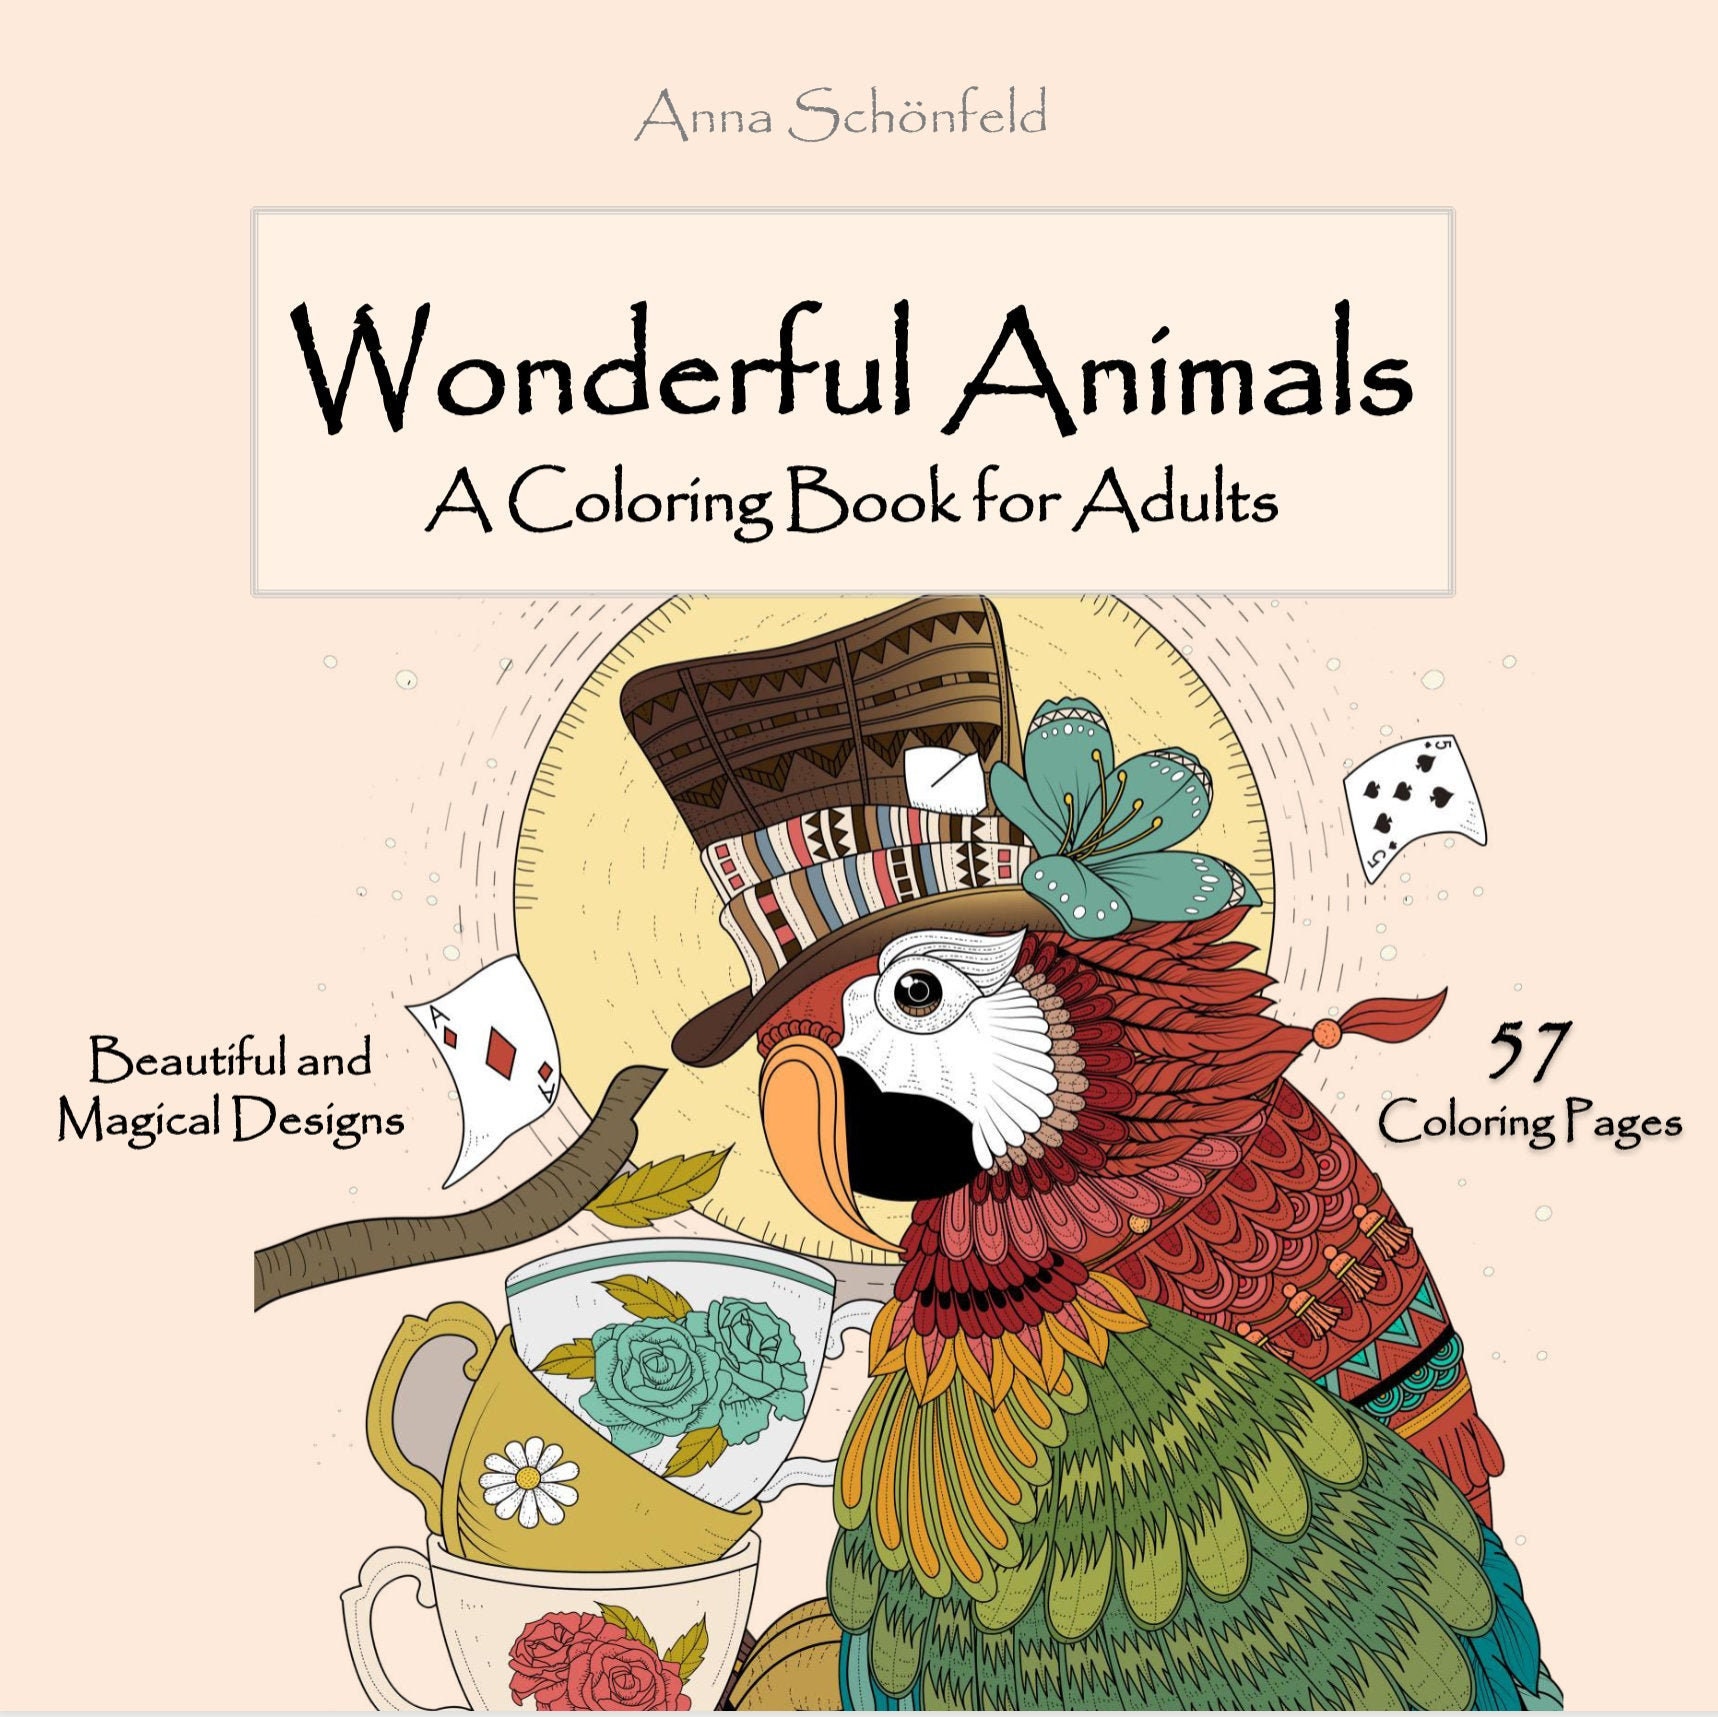 Adult Coloring Book: Stress Relieving Animal Designs, Celebration